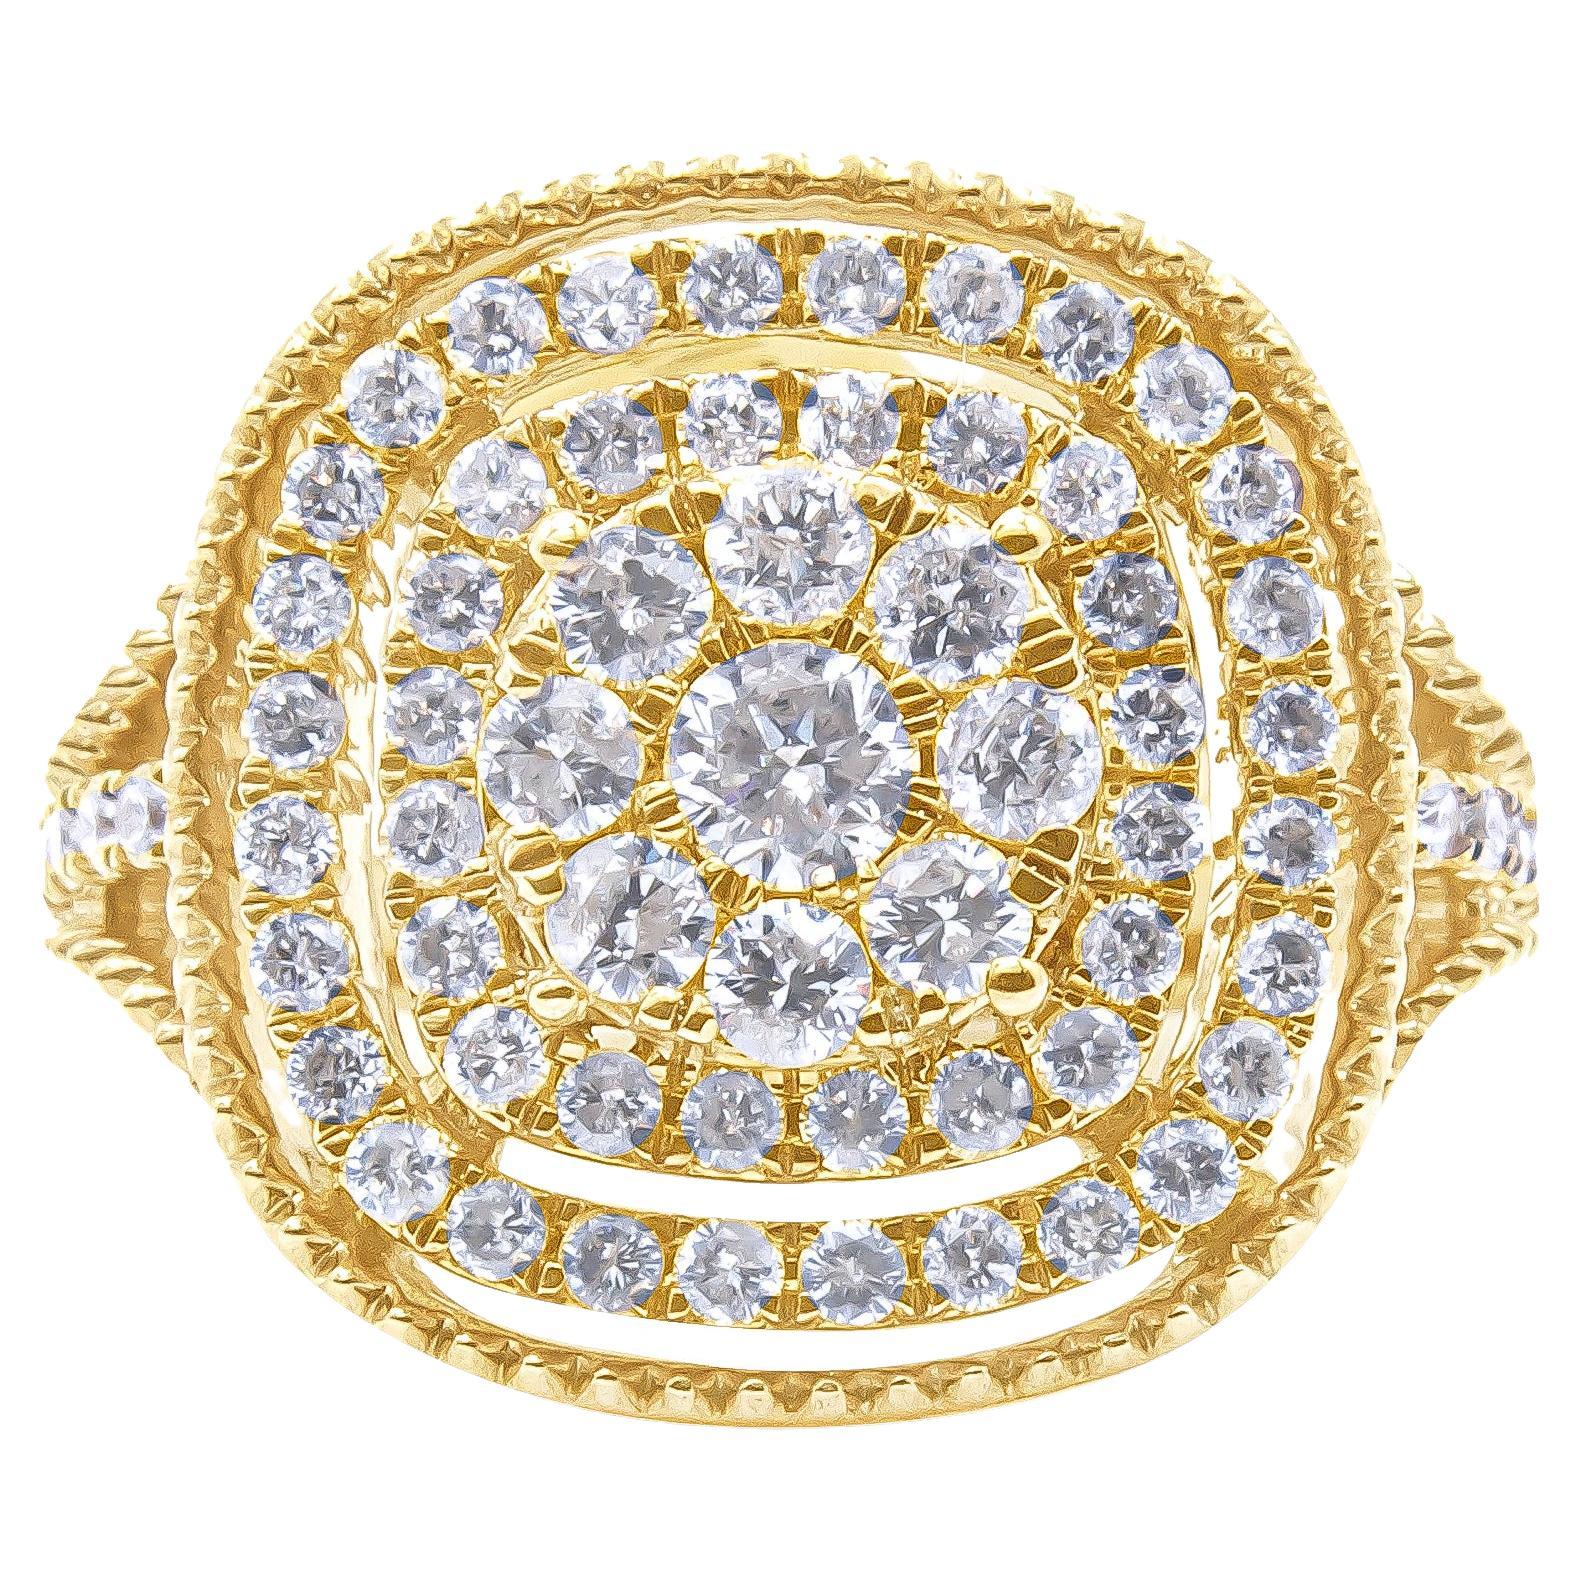 For Sale:  10K Yellow Gold Plated .925 Sterling Silver 1 1/4 Carat Diamond Cocktail Ring